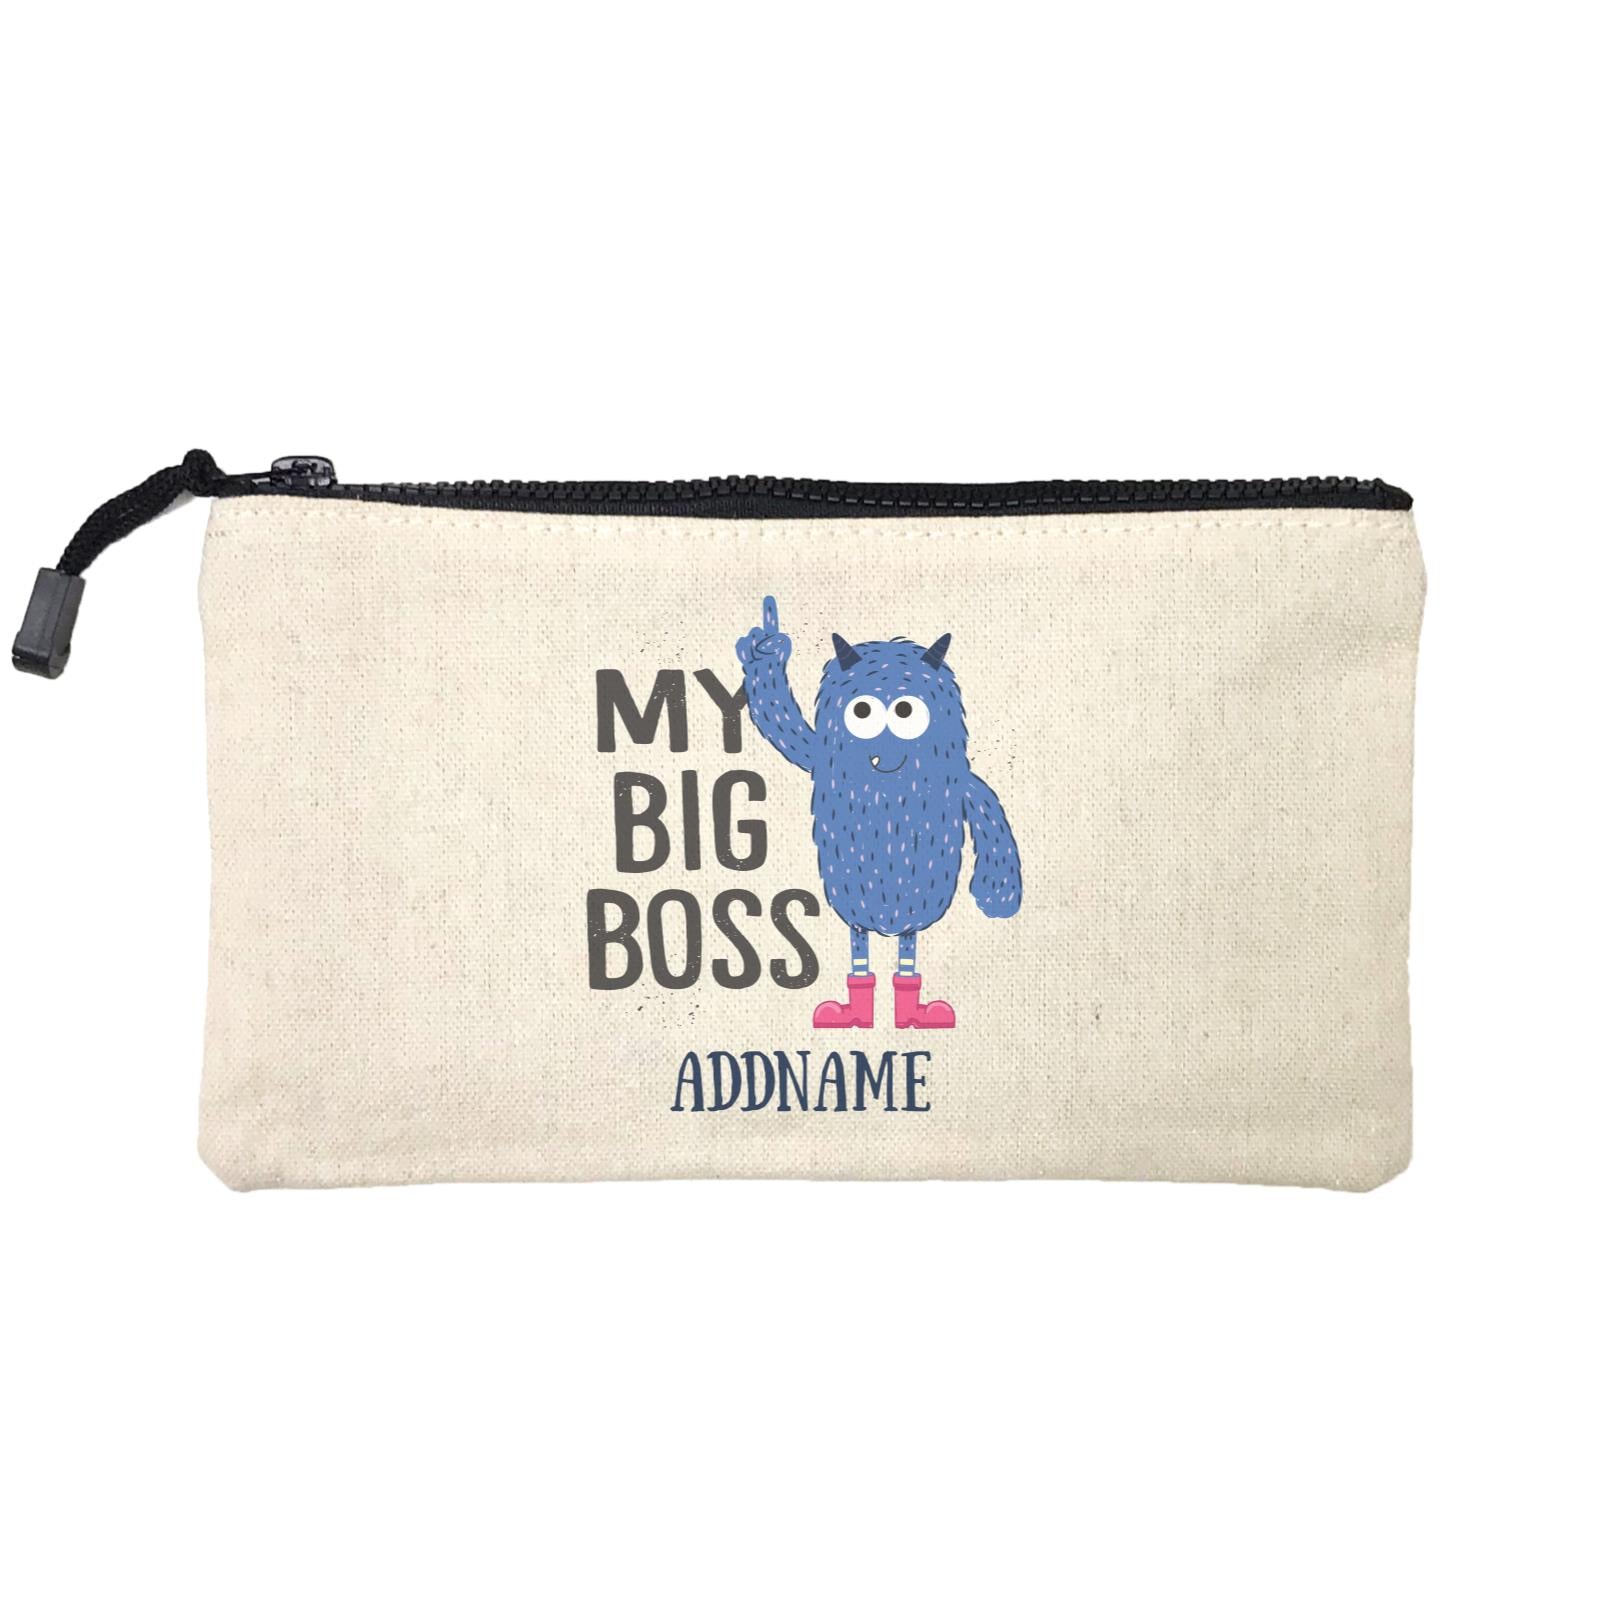 Cool Cute Monster My Big Boss Addname Mini Accessories Stationery Pouch